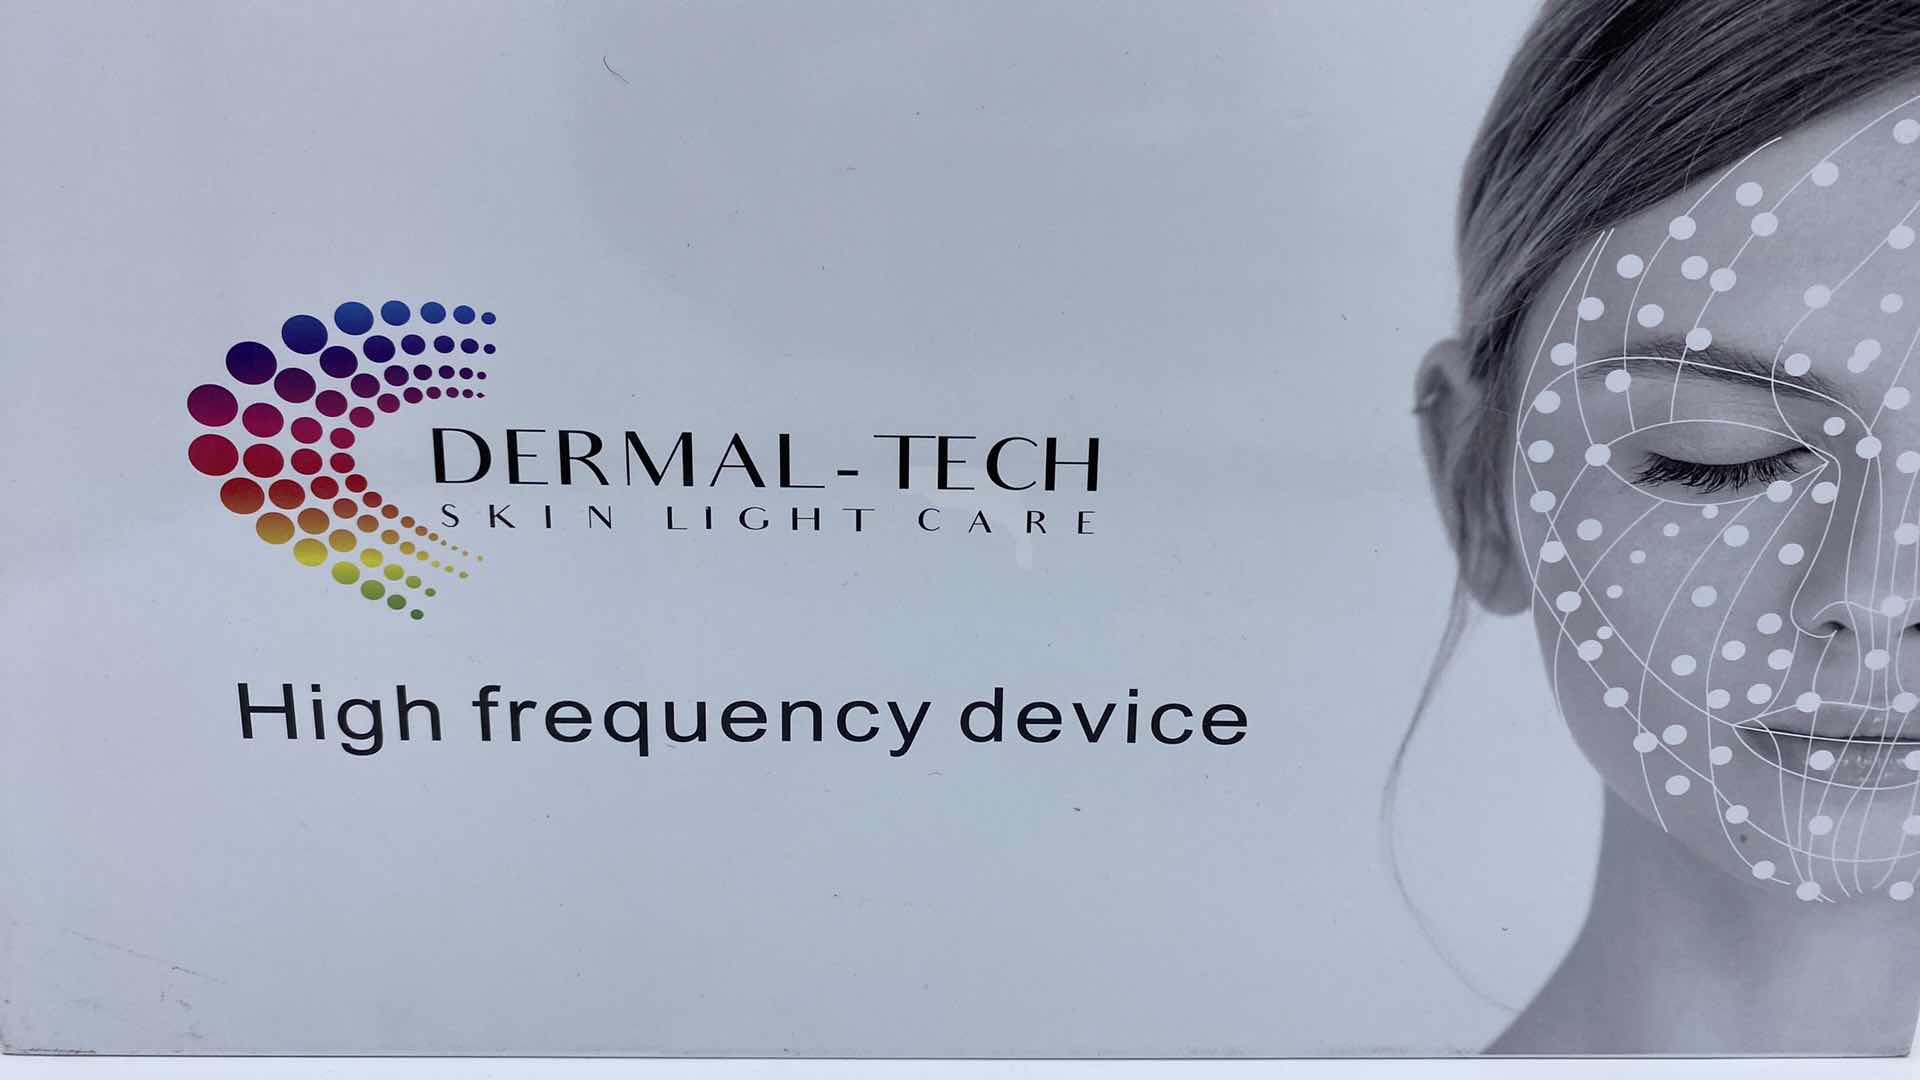 Photo 3 of NEW DERMAL TECH SKIN LIGHT CARE HIGH FREQUENCY DEVICE TO IMPROVE SKINS APPEARANCE